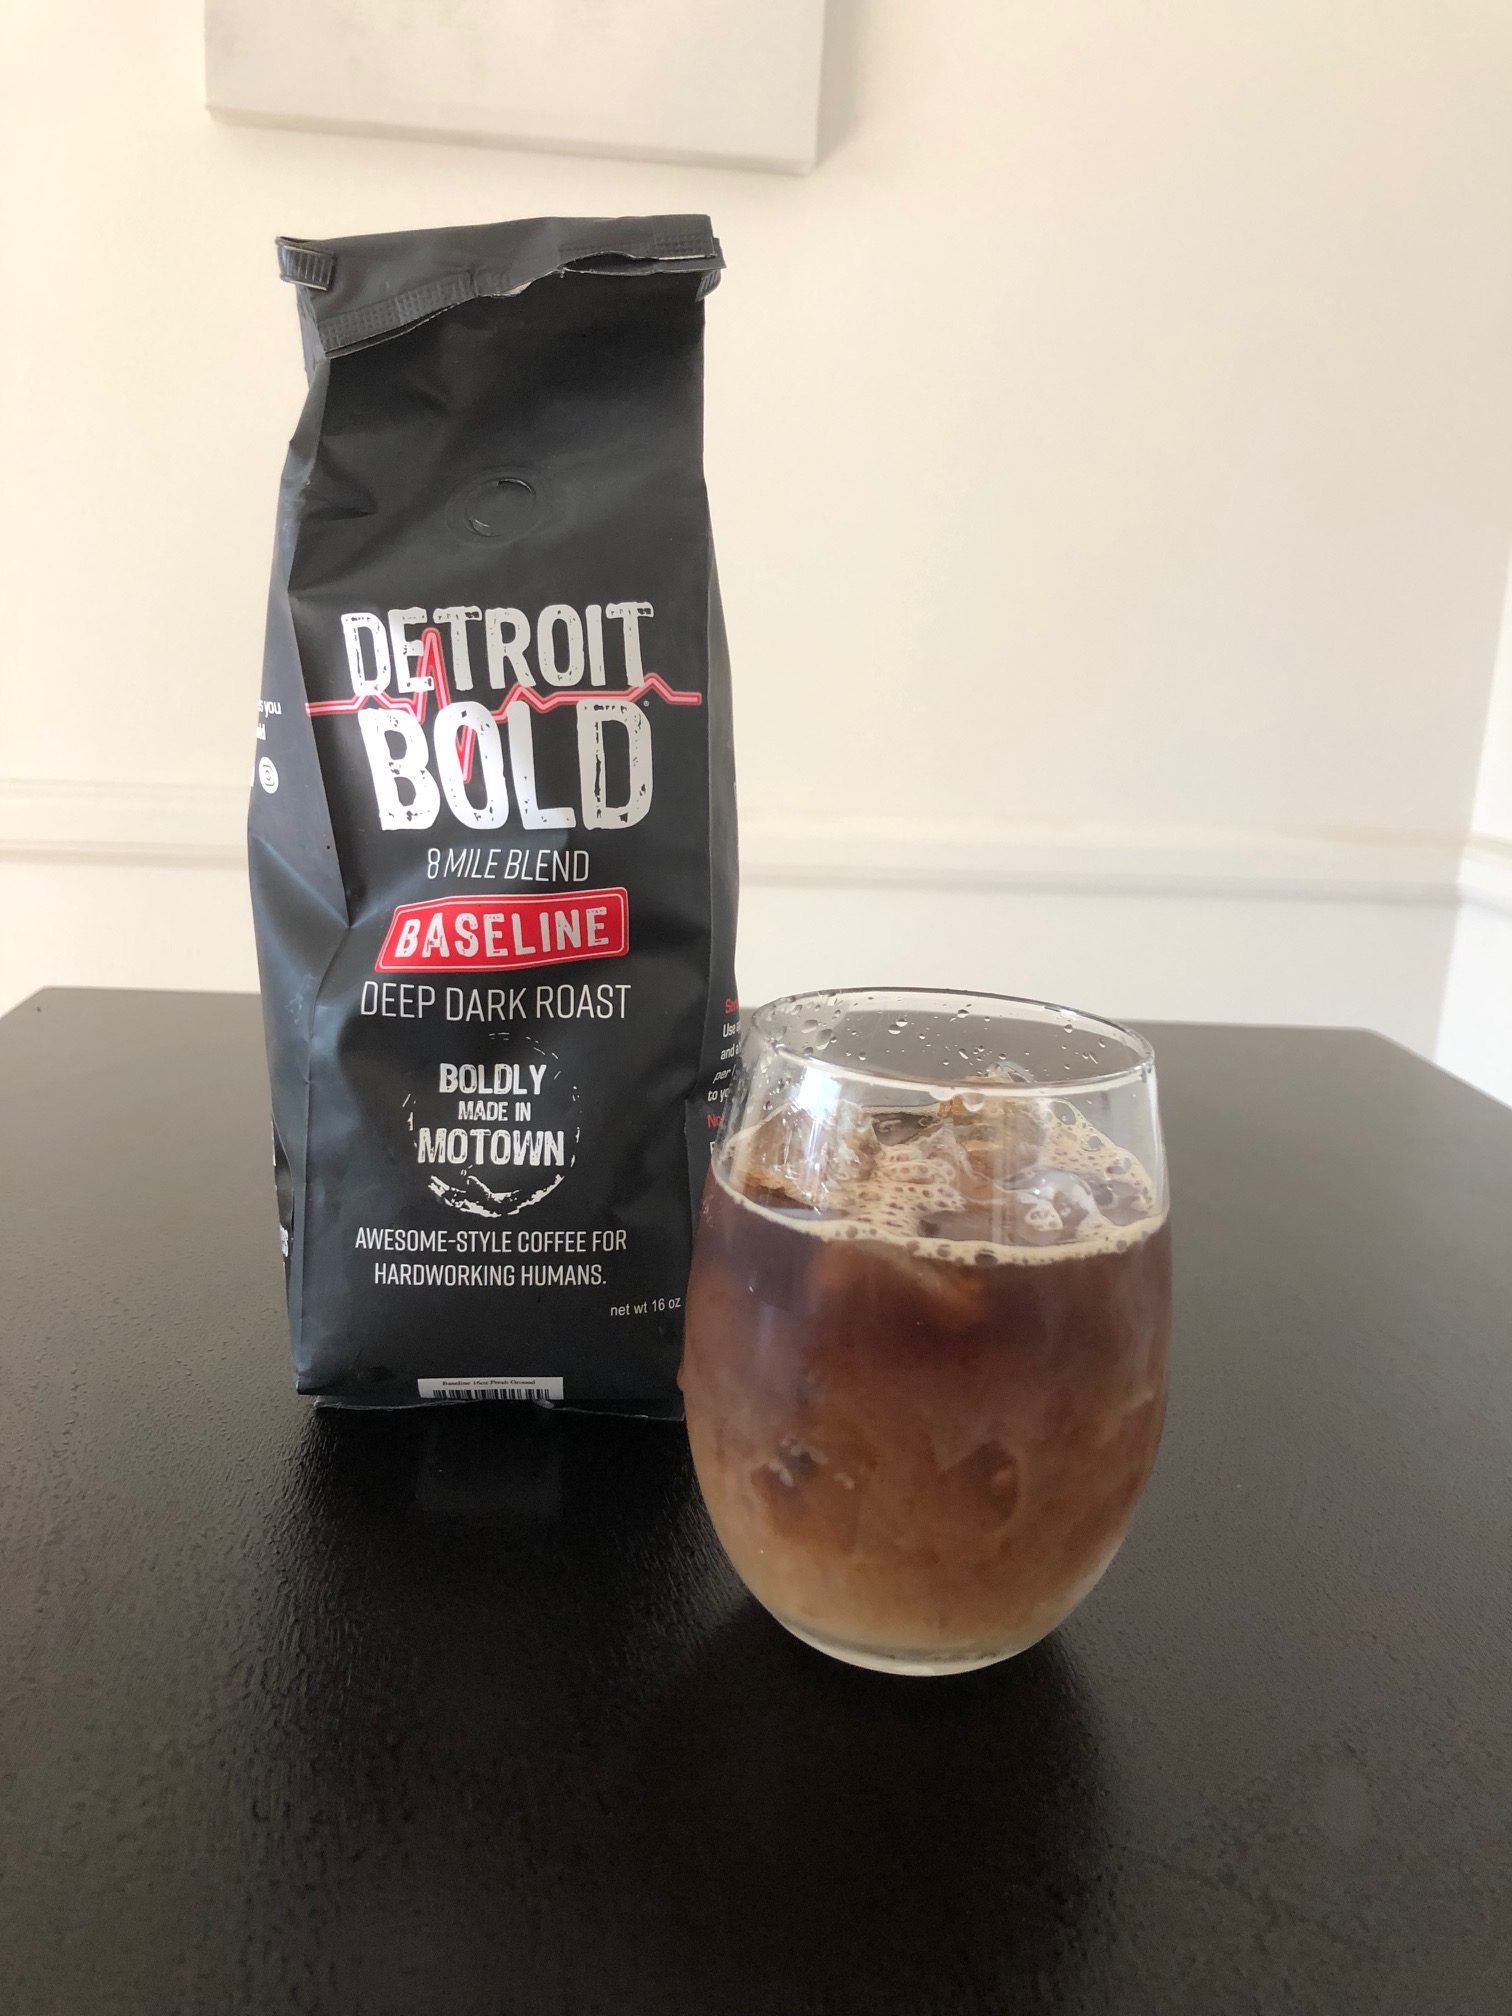 How to Make Iced Coffee at Home from Hot Coffee